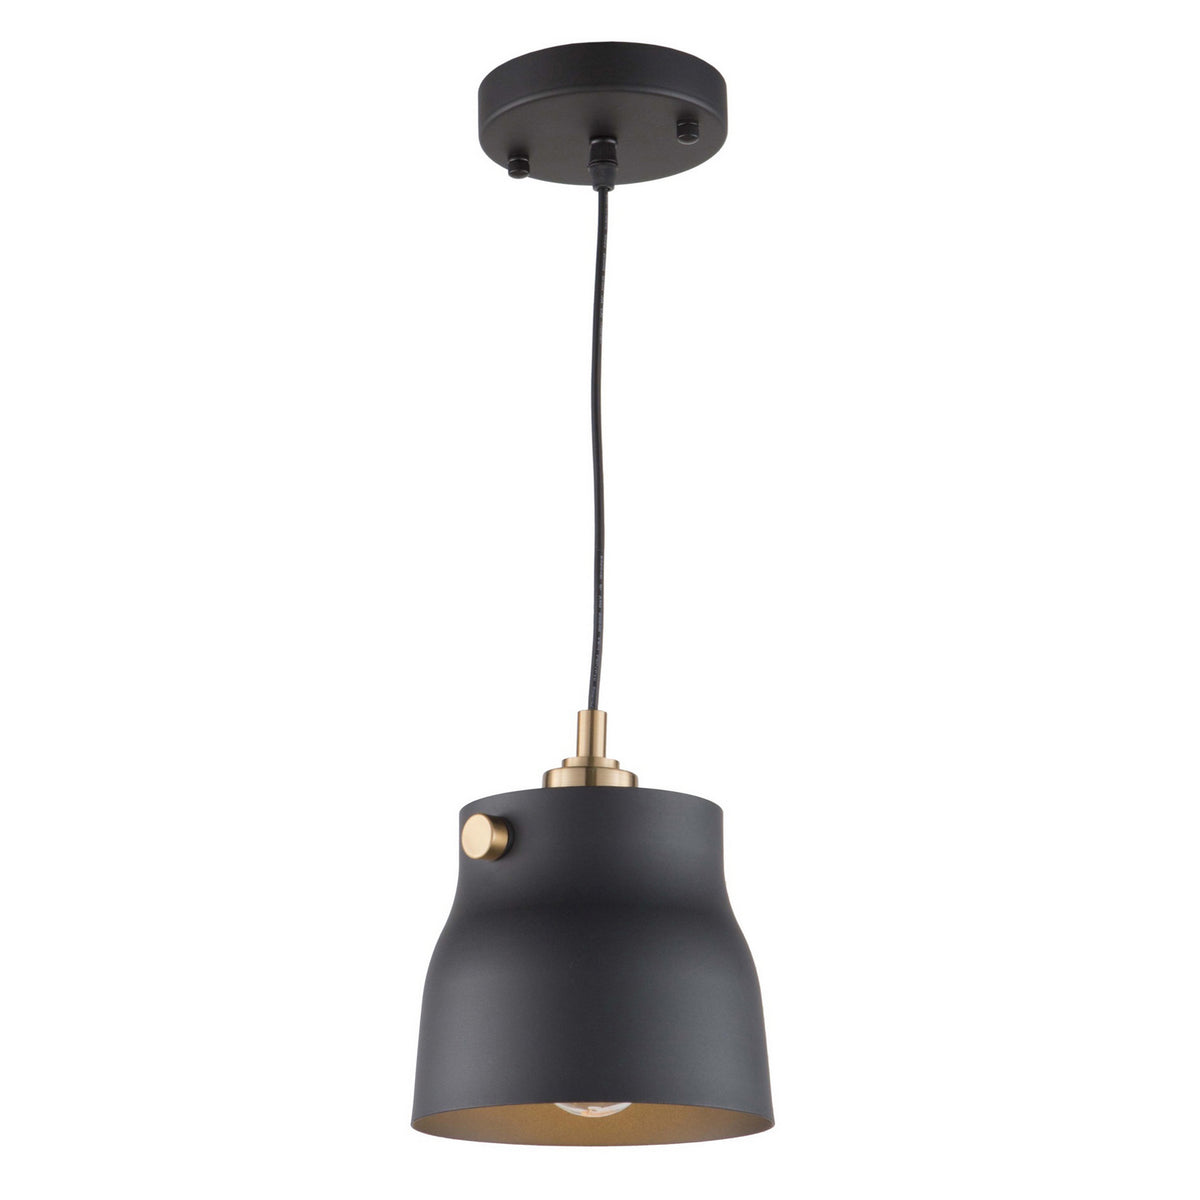 Artcraft One Light Pendant from the Euro Industrial collection in Matte Black & Harvest Brass finish